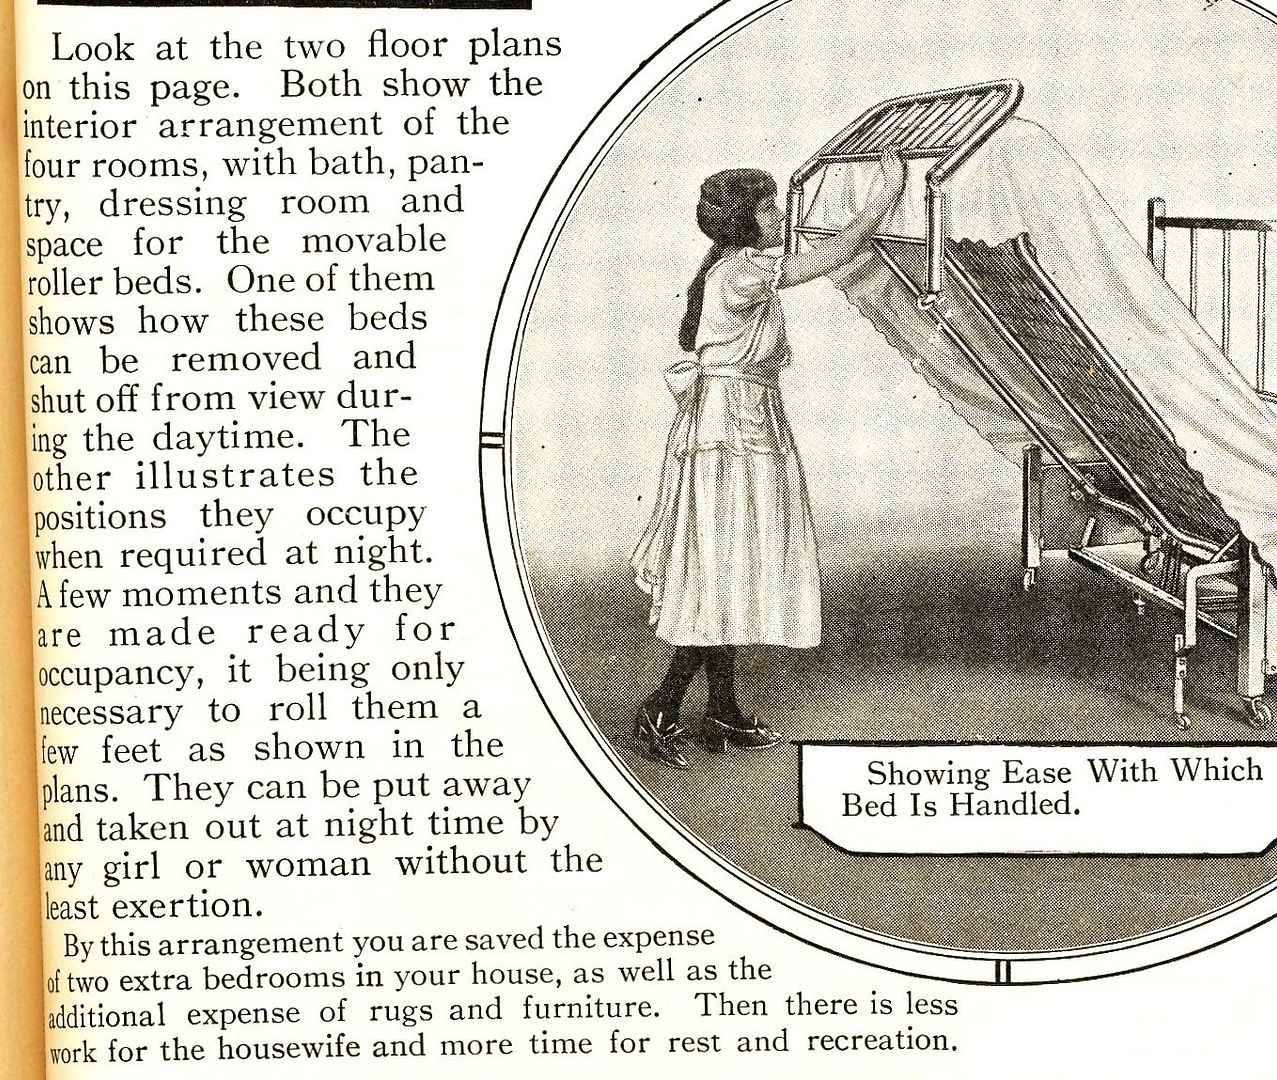 In another catalog promotion, Sears promises that folding up that wall bed is so easy even a child can do it. 